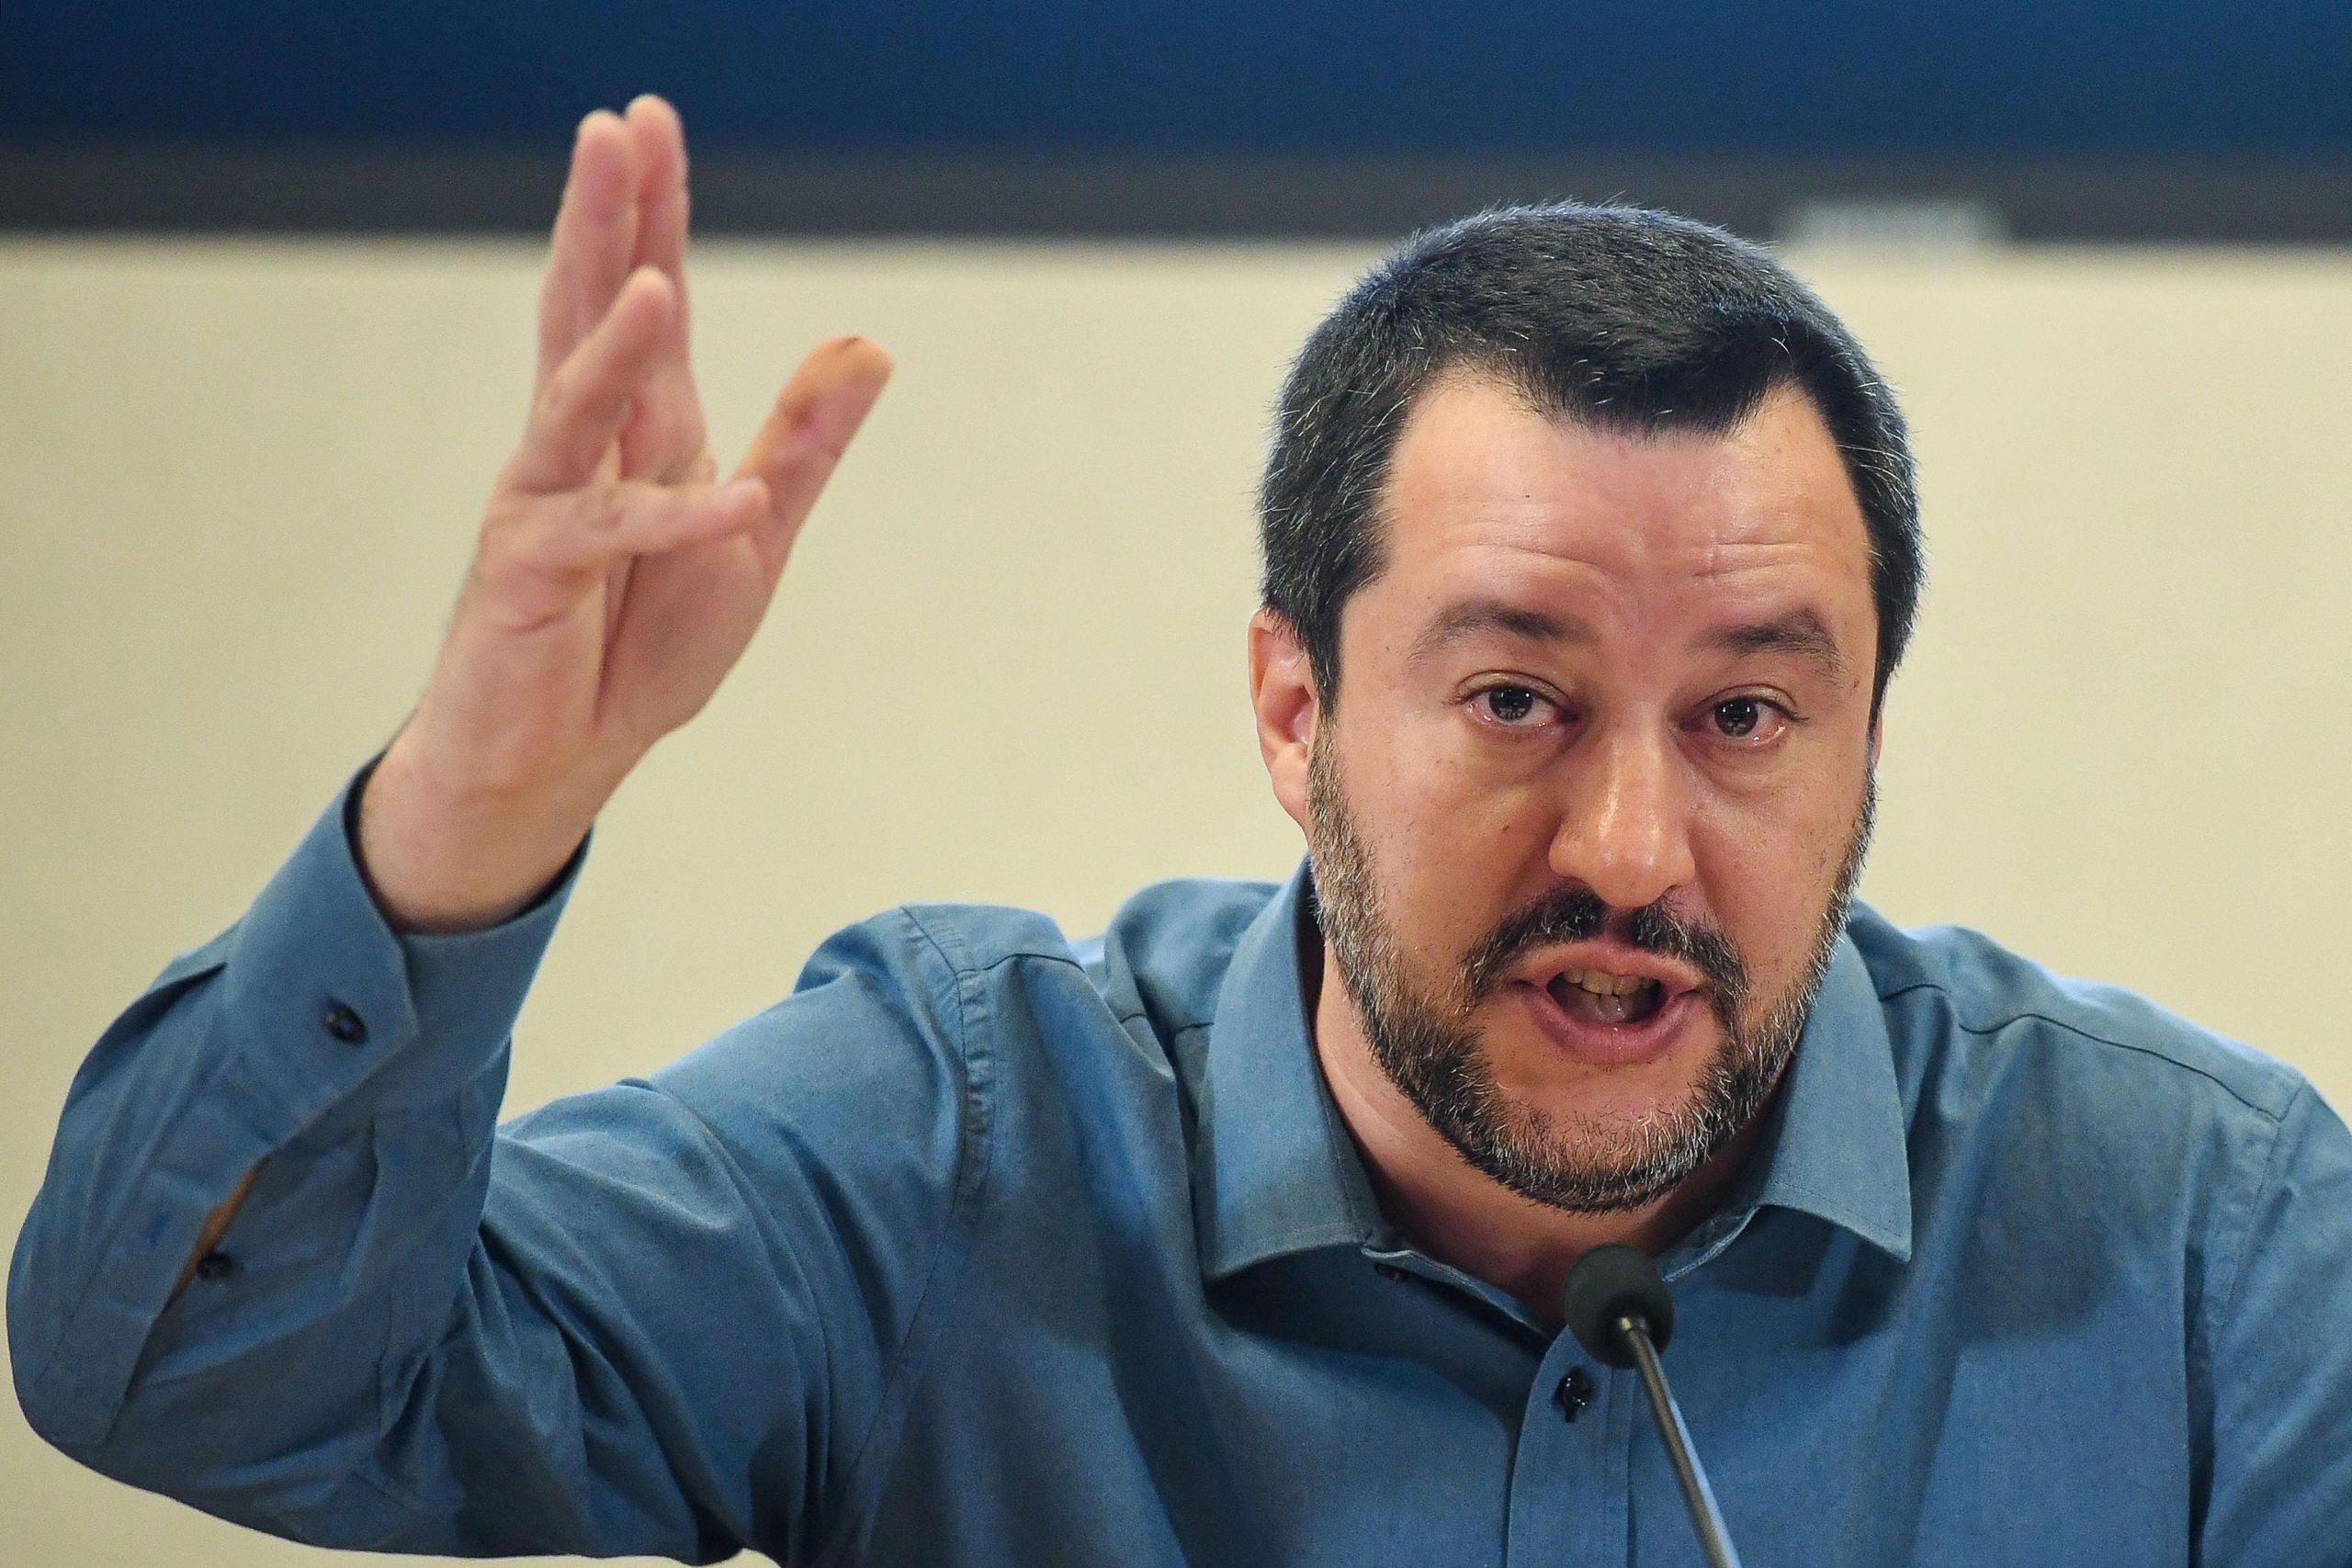 2019-01-23 13:53:51 epa07312061 Italy's Deputy Premier and Interior Minister Matteo Salvini talks during a press conference over the migrants issue, in Rome, Italy, 23 January 2019. Salvini said that the EU's SOPHIA naval mission in the Mediterranean to combat human trafficking must be scrapped unless to change the rules are changed as it places too much burden on Italy. 'The point of the Sophia naval mission is that all the rescued immigrants disembark exclusively in Italy after an ingenious agreement signed by the government of (former Italian Prime Minister) Matteo Renzi', Salvini said.  EPA/ALESSANDRO DI MEO